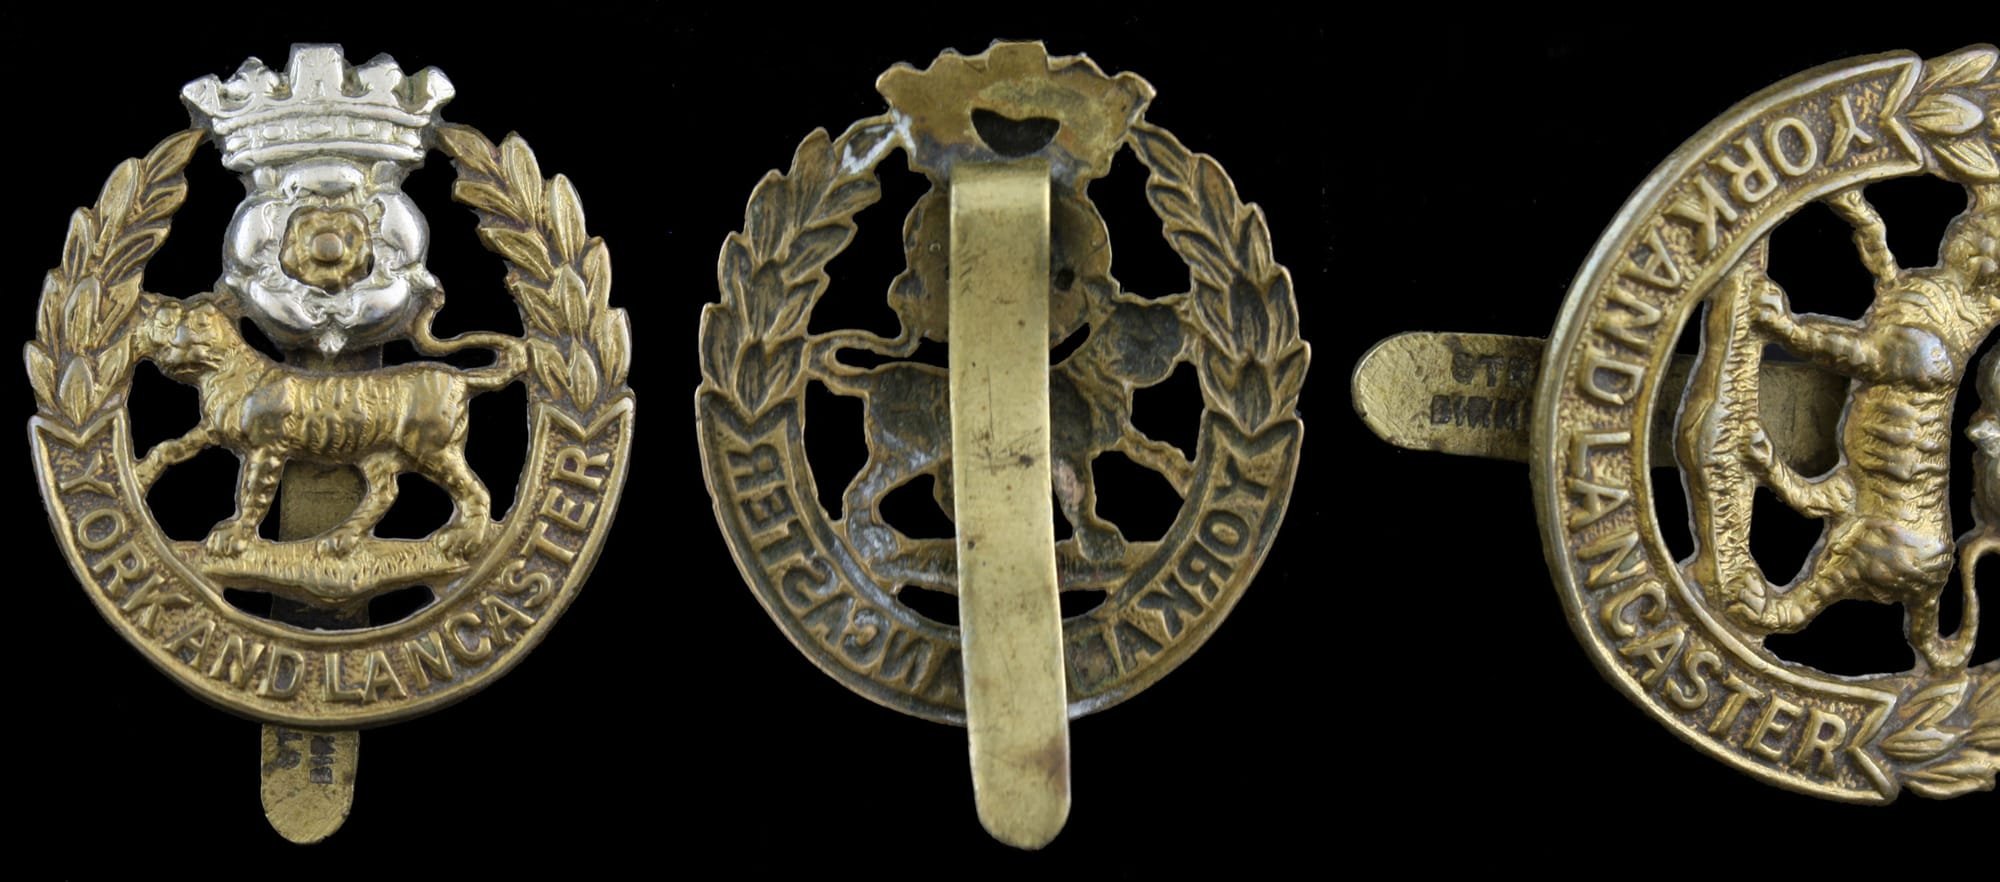 A Stratton Marked Other Ranks Badge 1914 to mid 1920’s